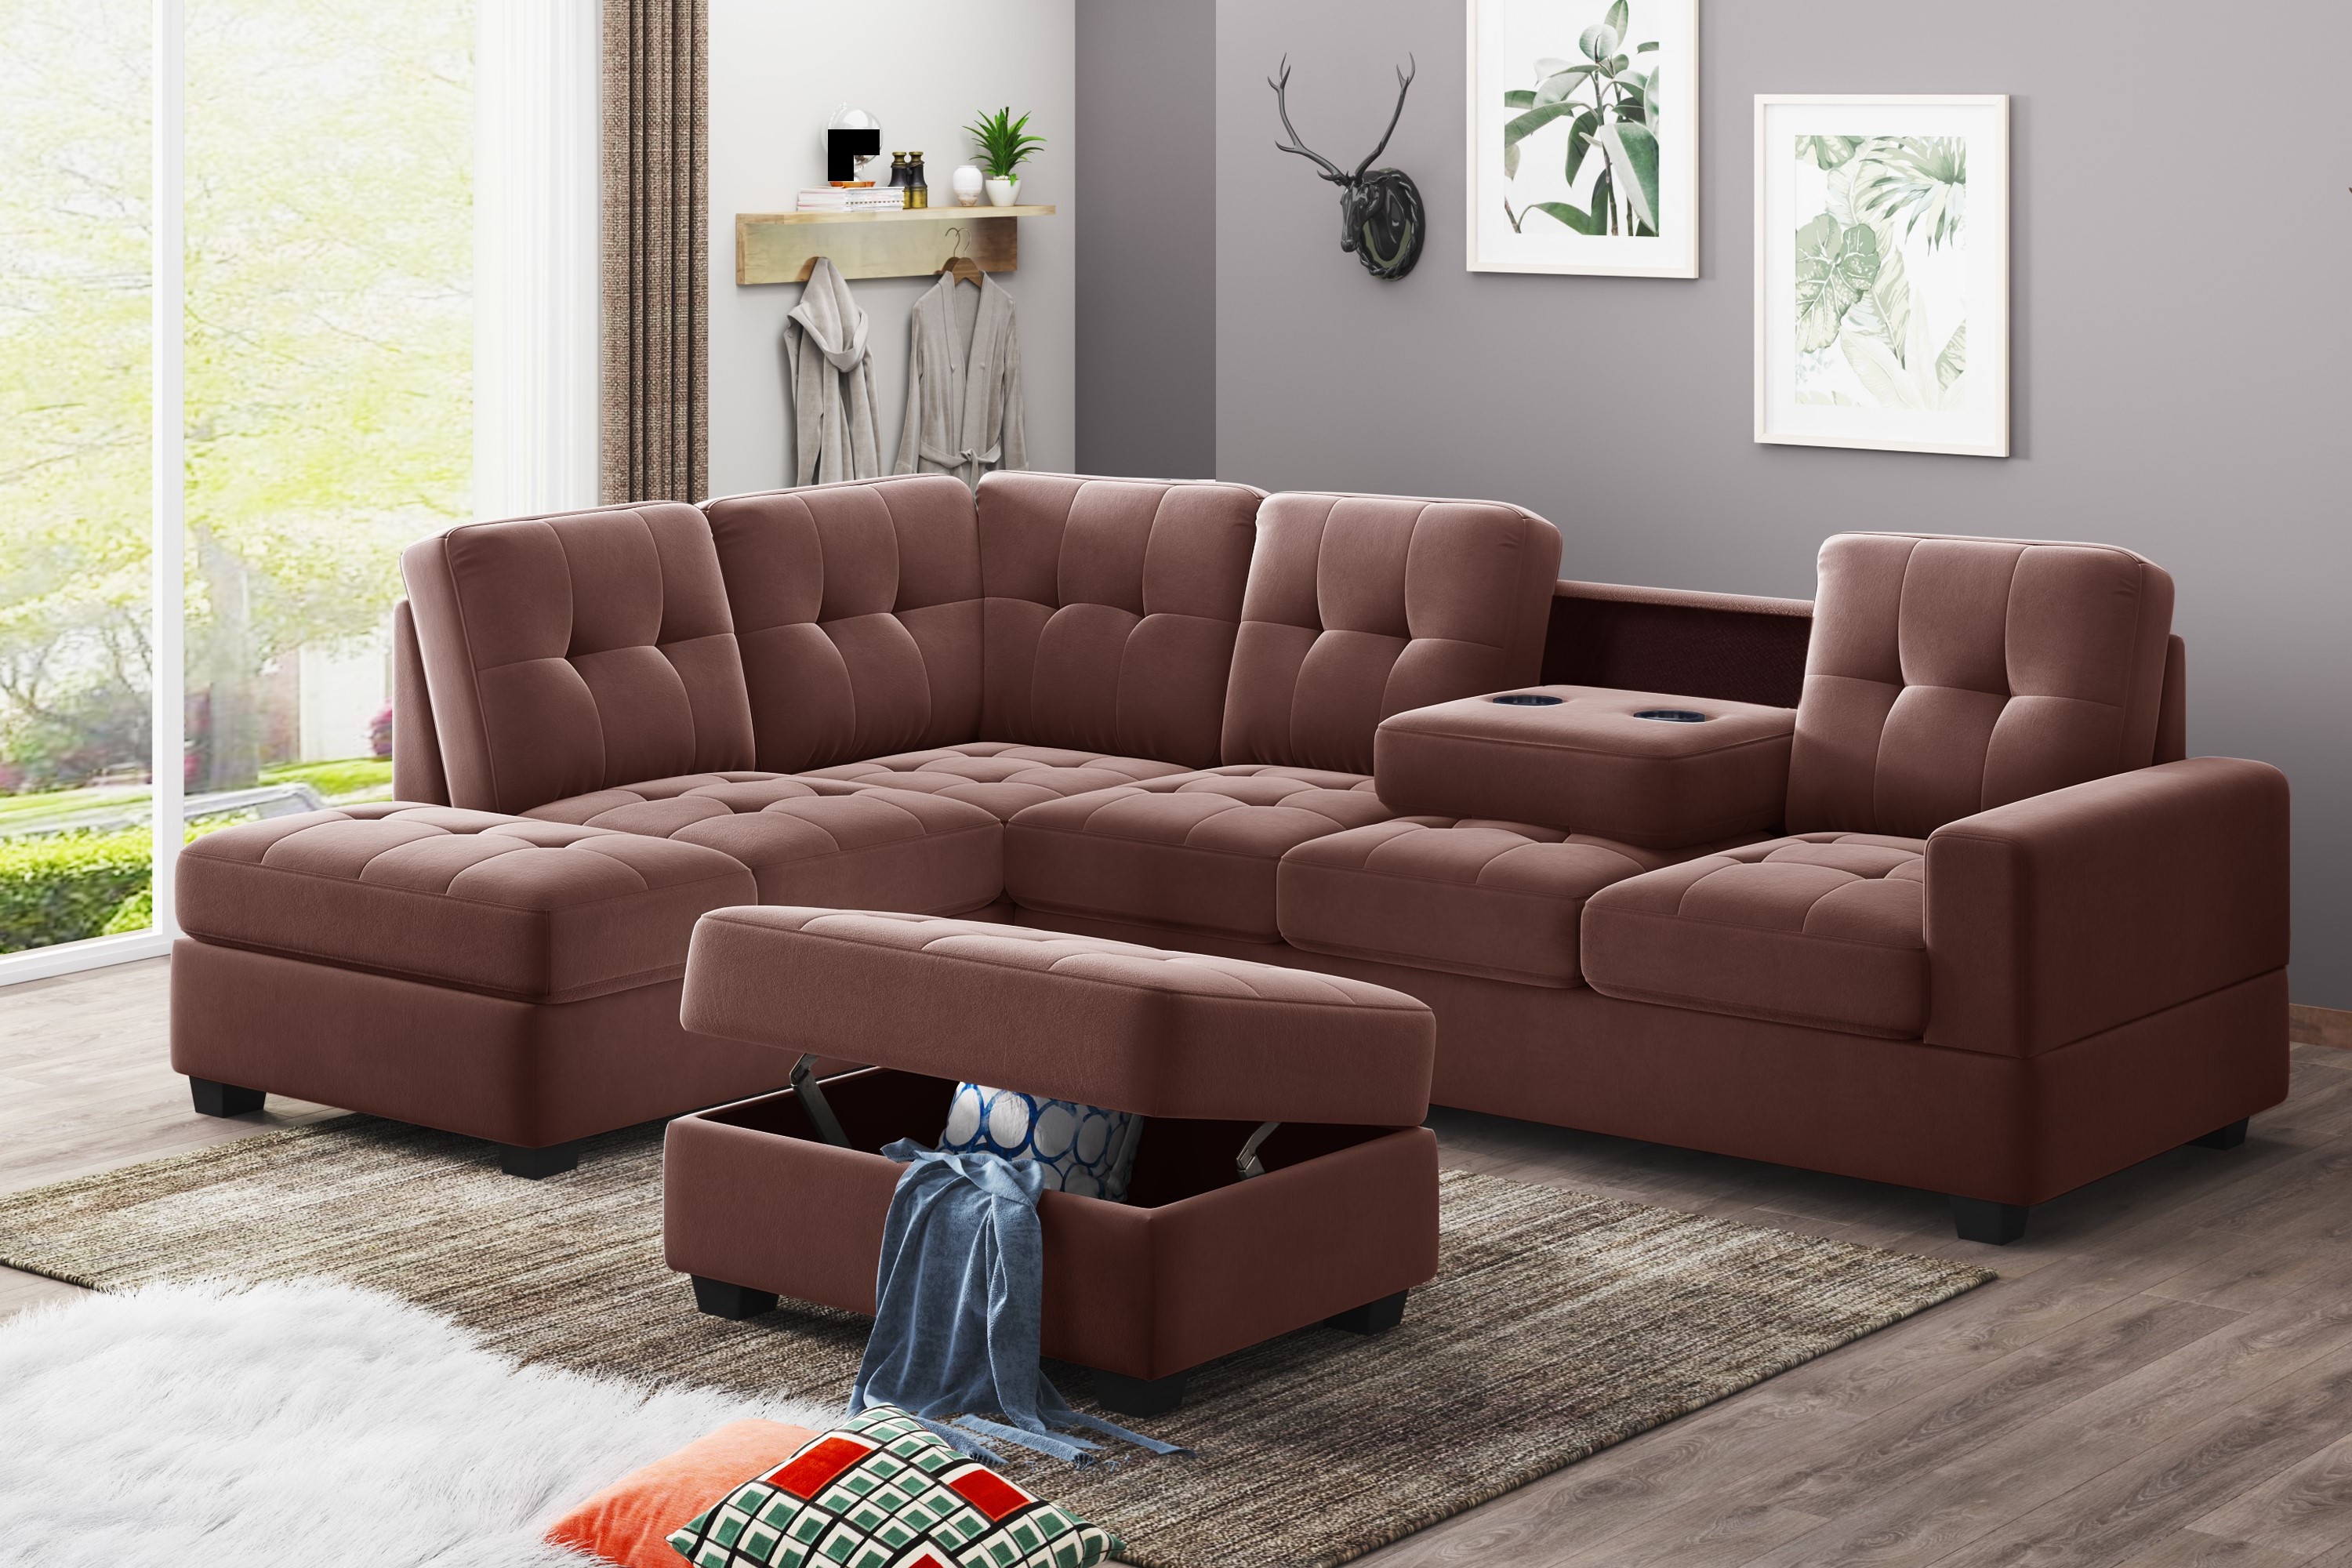 Sectional Sofa with Reversible Chaise Lounge, L-Shaped Couch with Storage Ottoman and Cup Holders